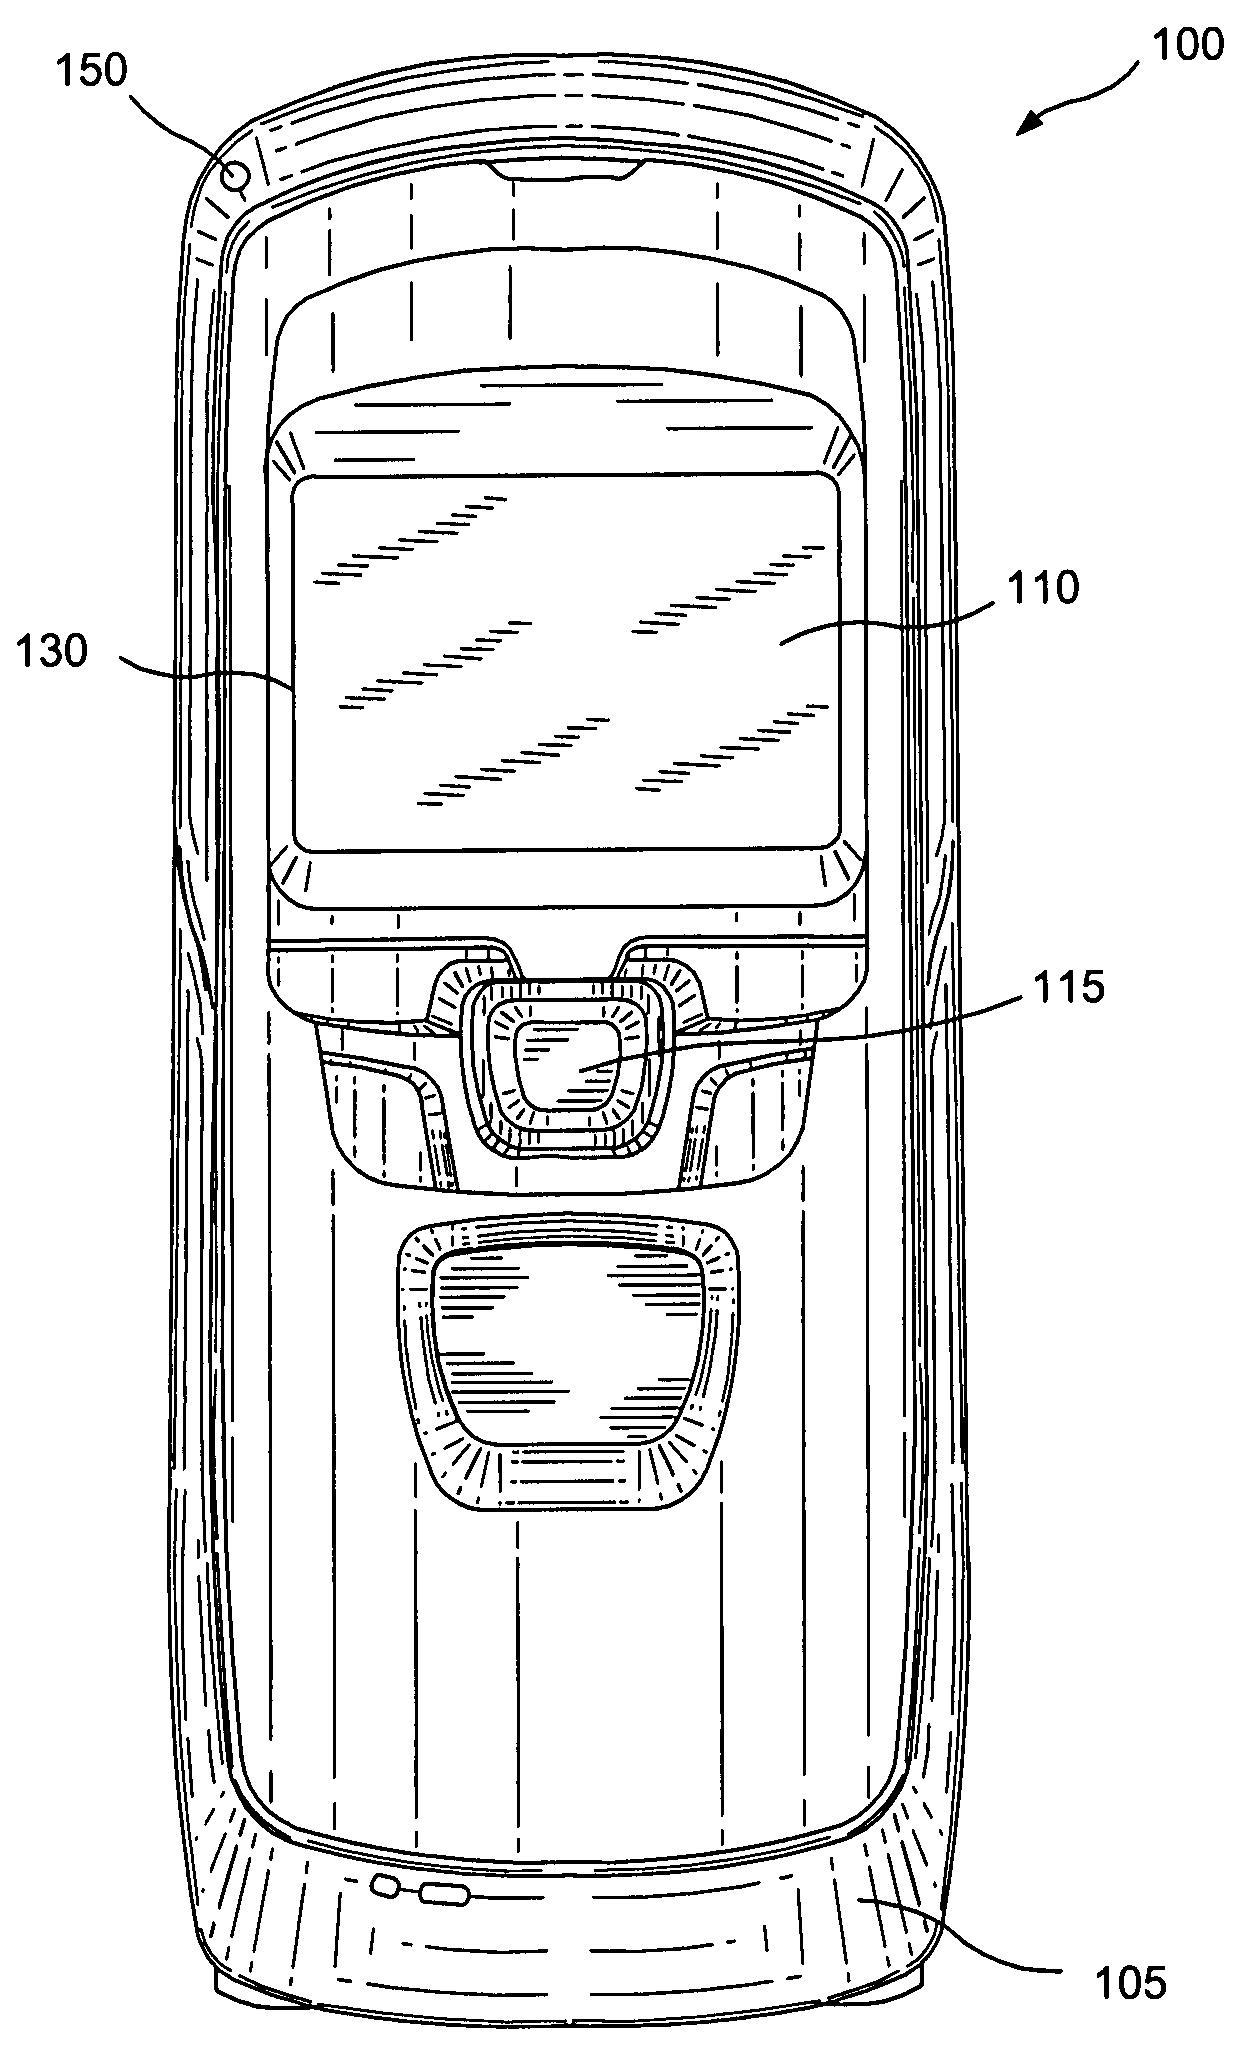 System and Method for Optimized Visualization on a Display Window